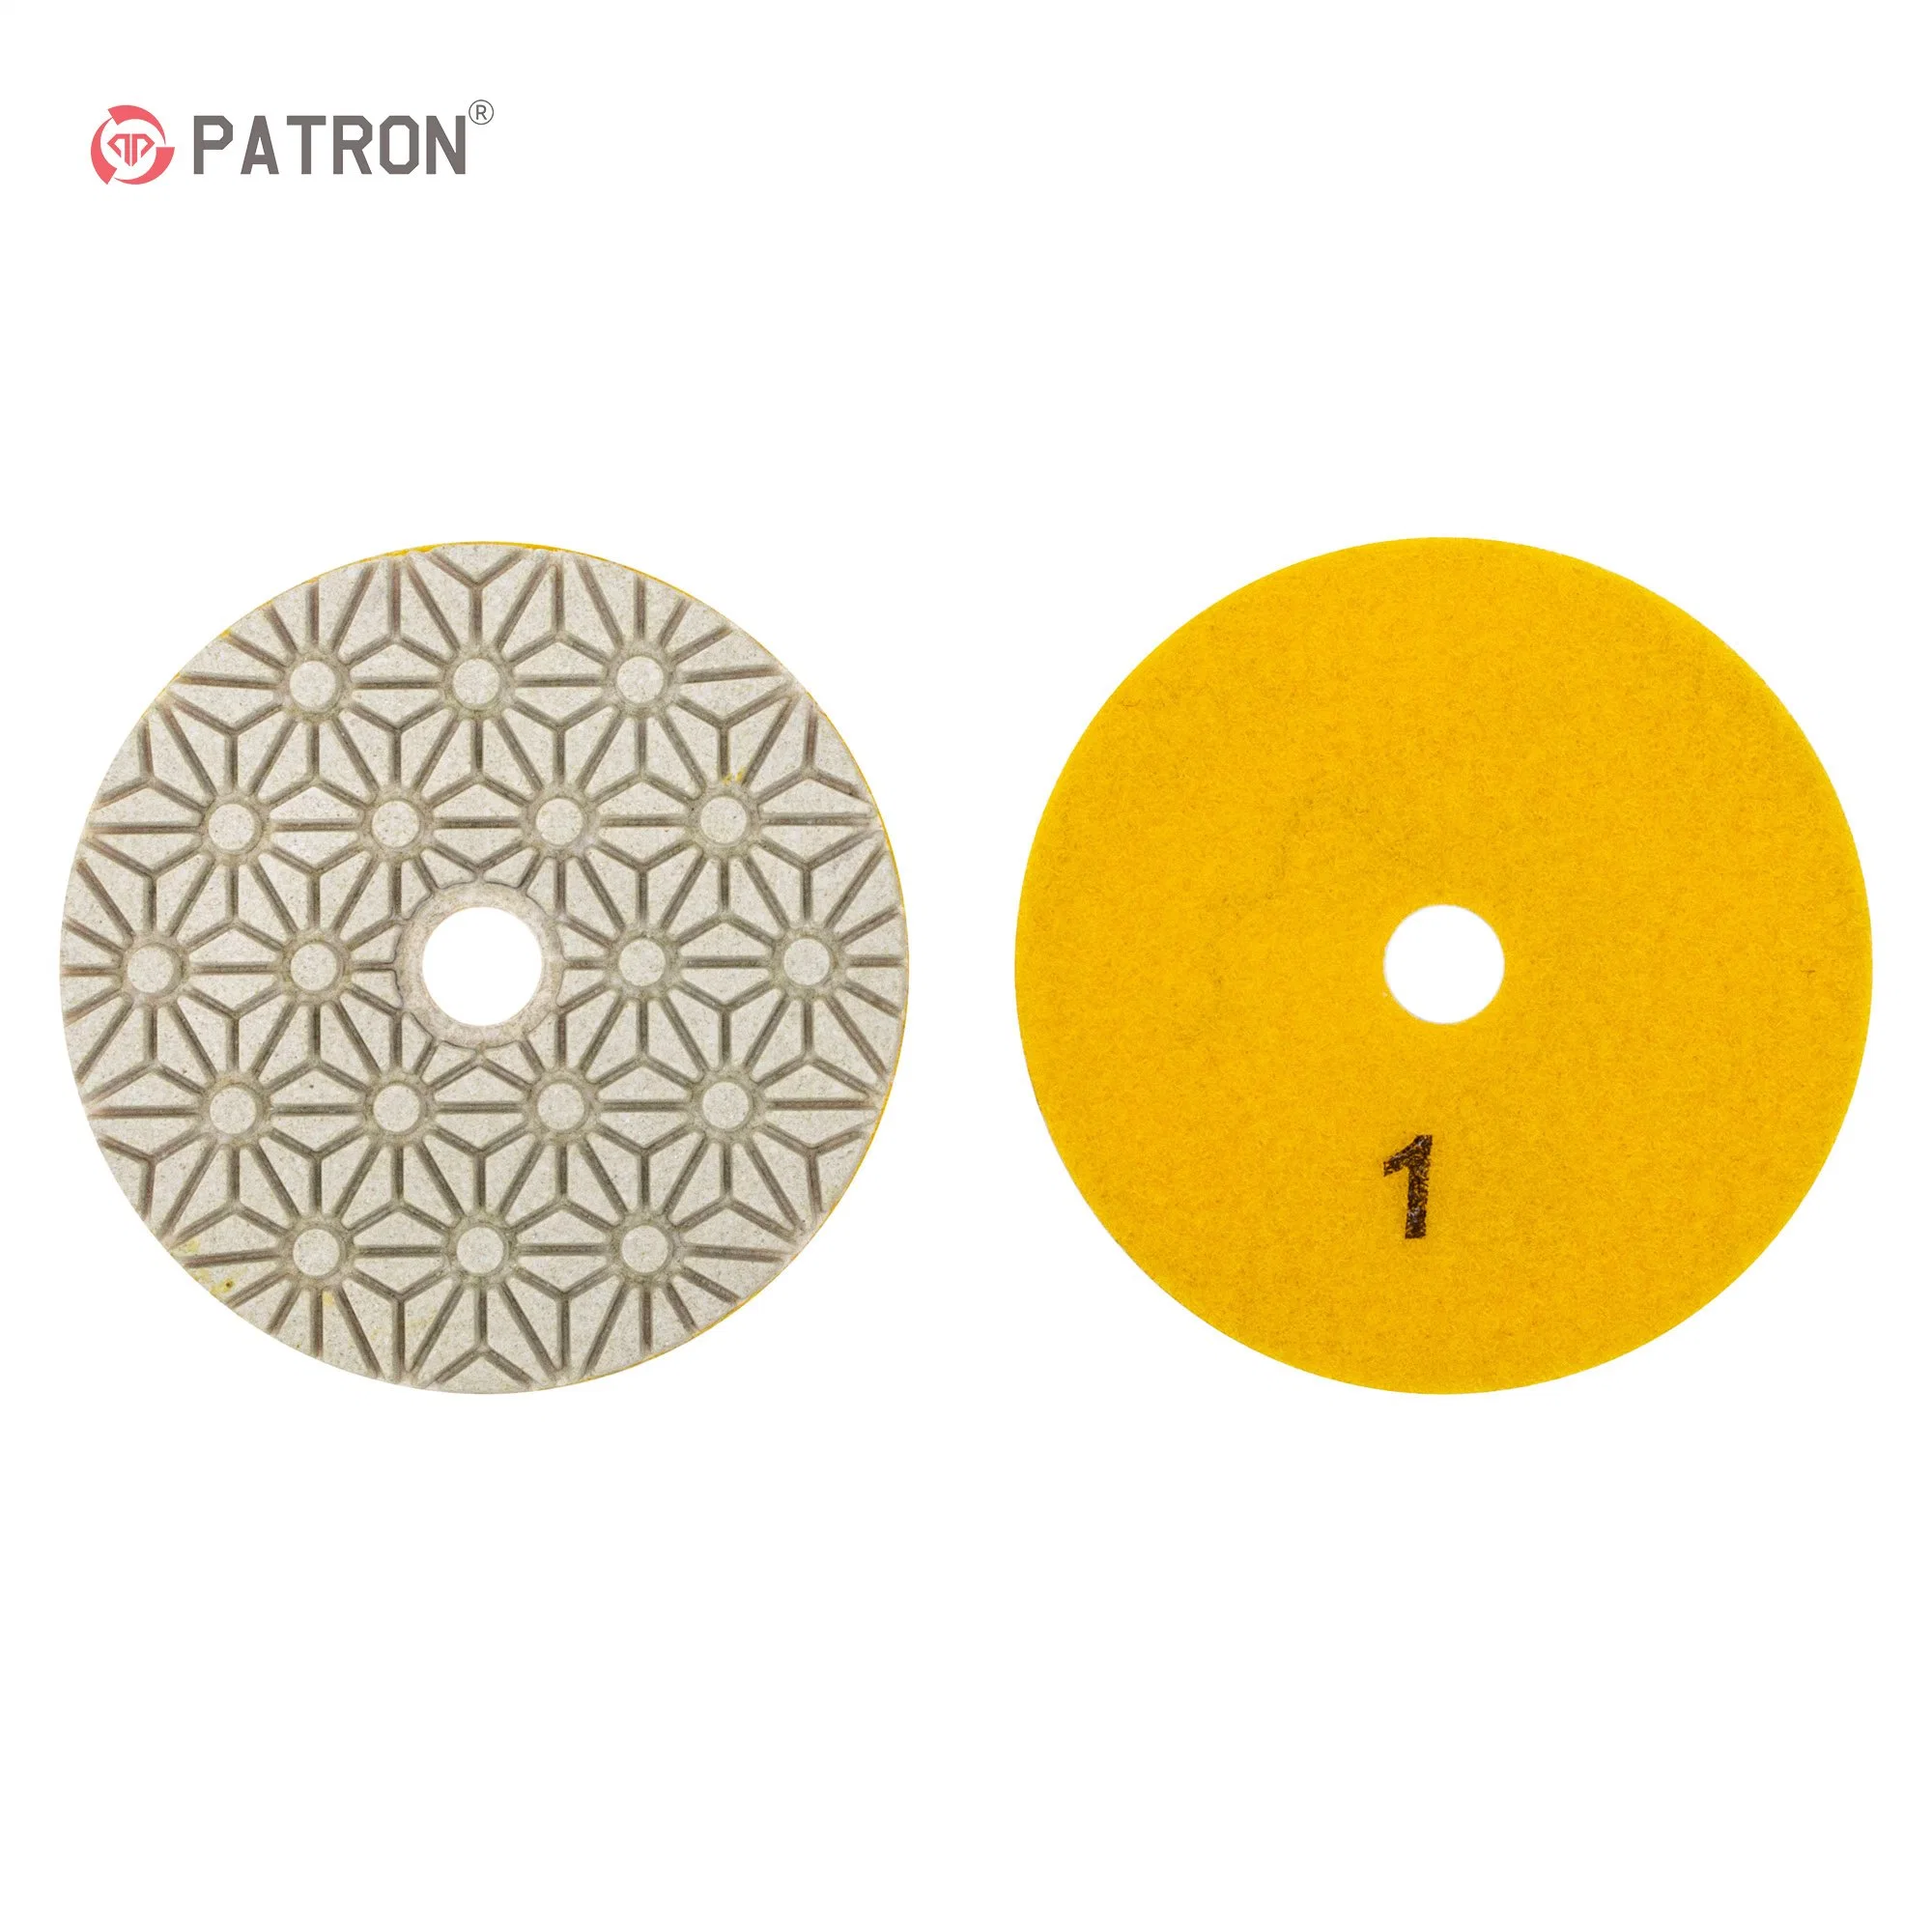 Diamond Polishing Pads Abrasive Tools for Marble Quartz Granite Stone with High Quality and High Efficiency